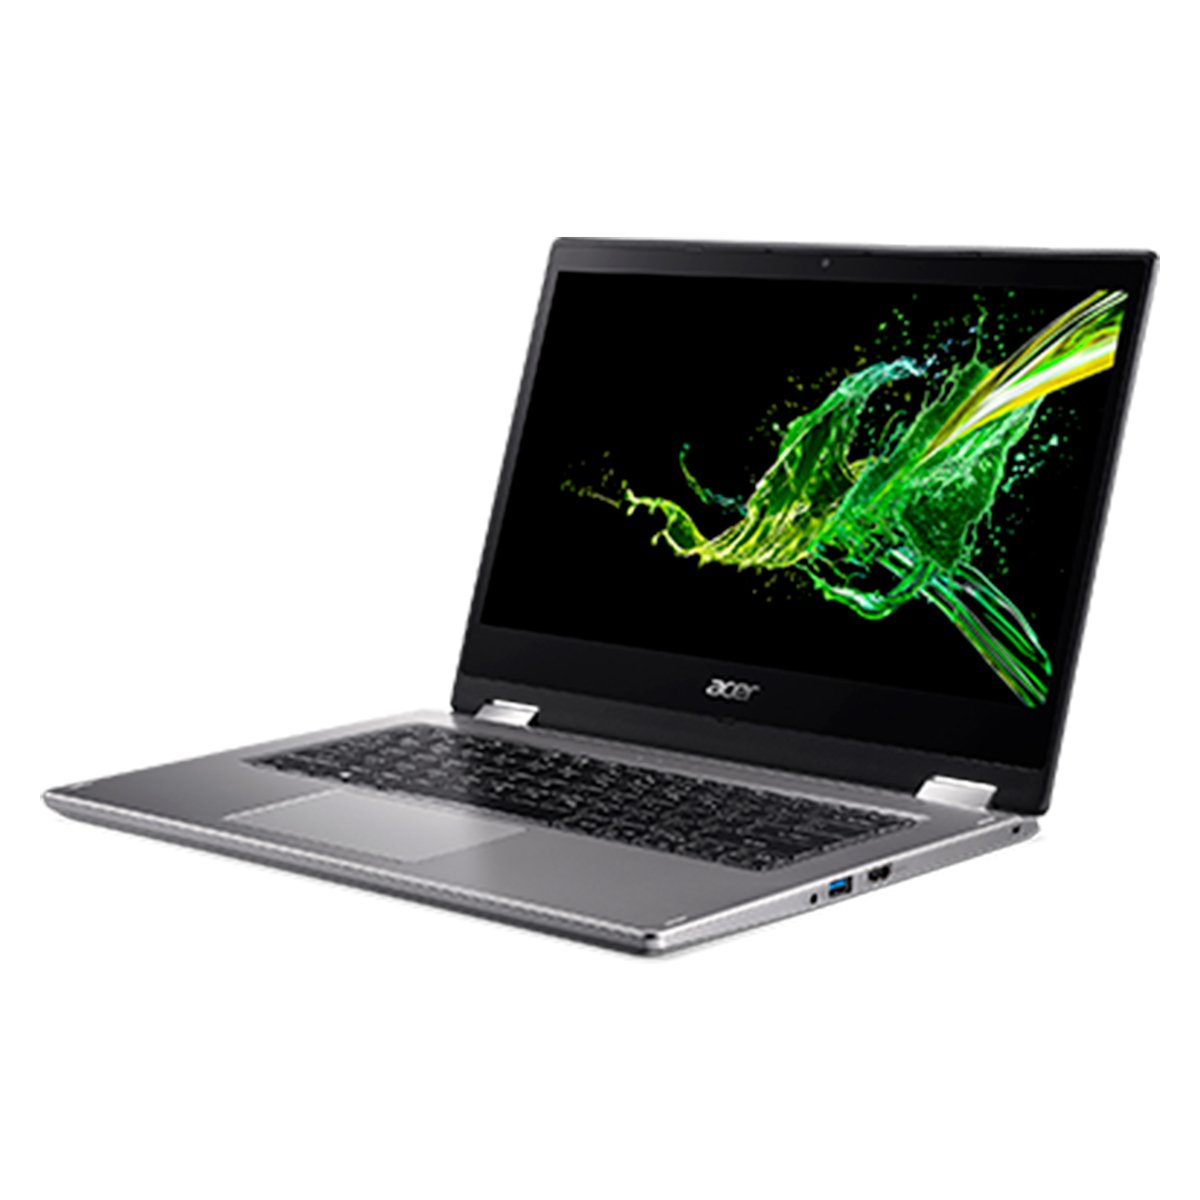 Acer 2 IN 1 Notebook Spin 3 NX.HQ7EM.00D,Core i5-1035G1,8GB RAM,512GB SSD,14.0"FHD IPS,Windows 10,Silver